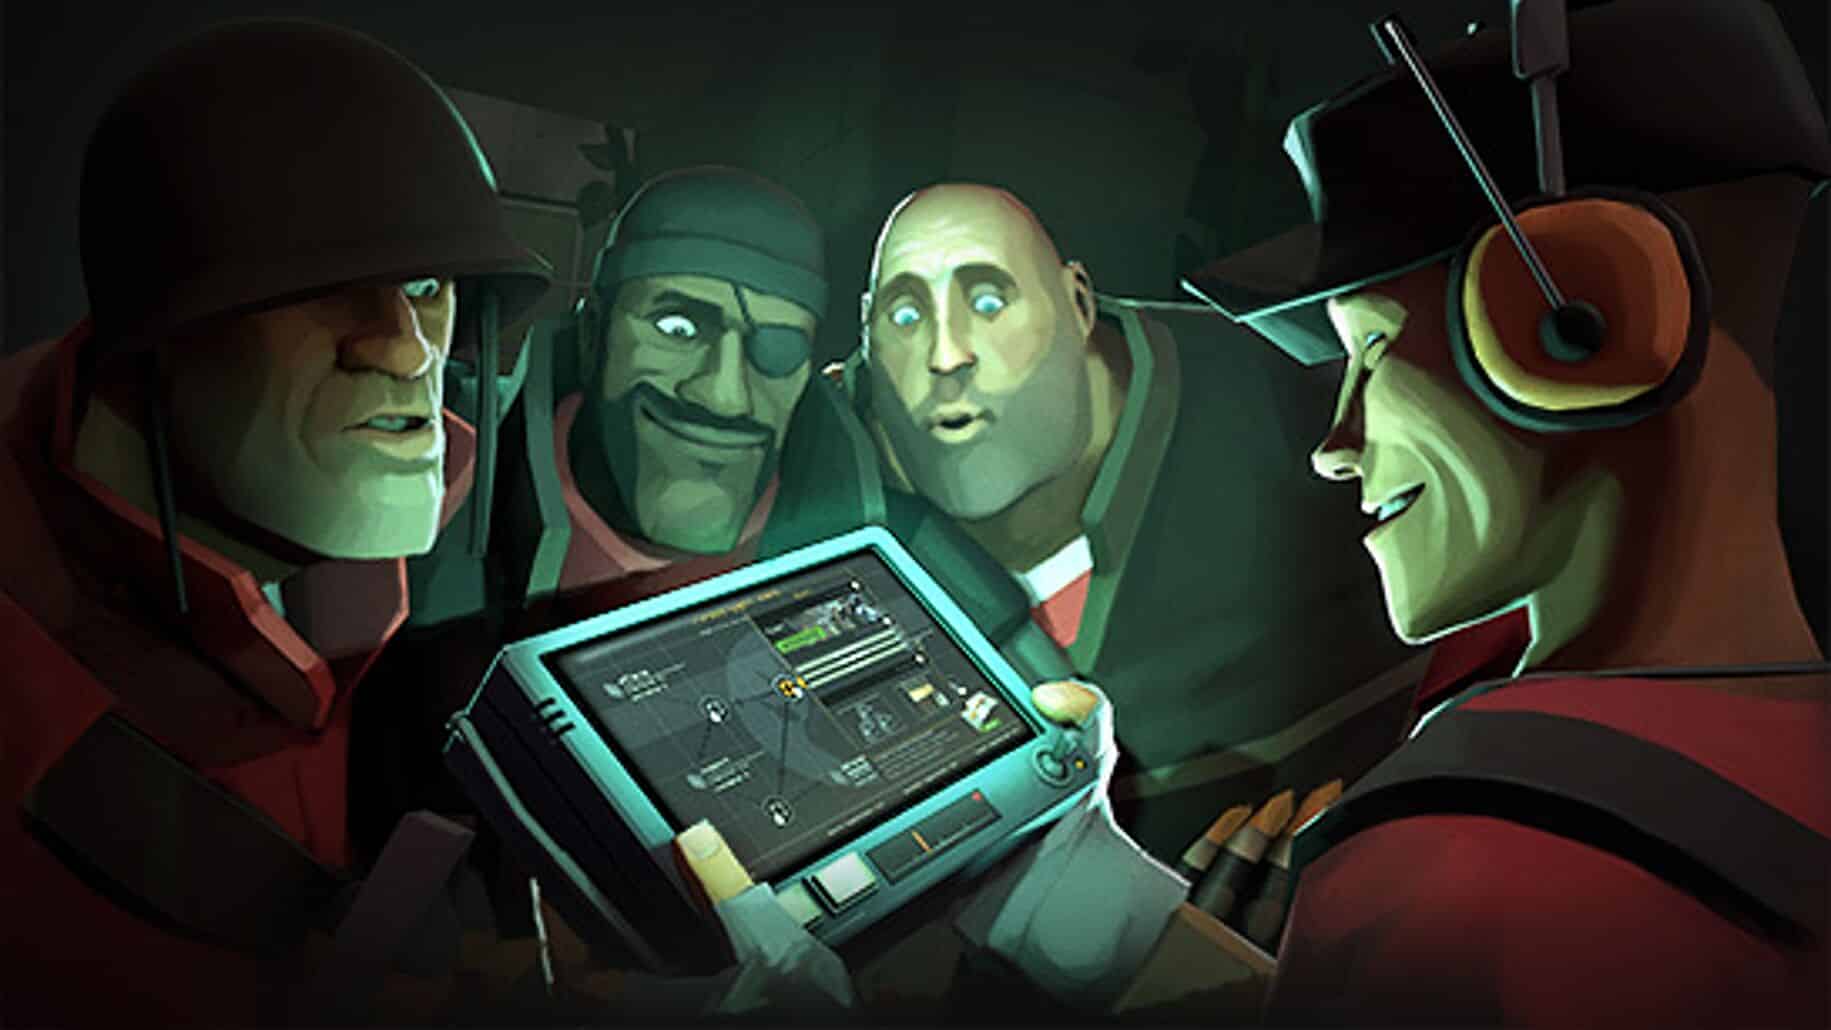 Team Fortress 2 received another exploit-fixing update